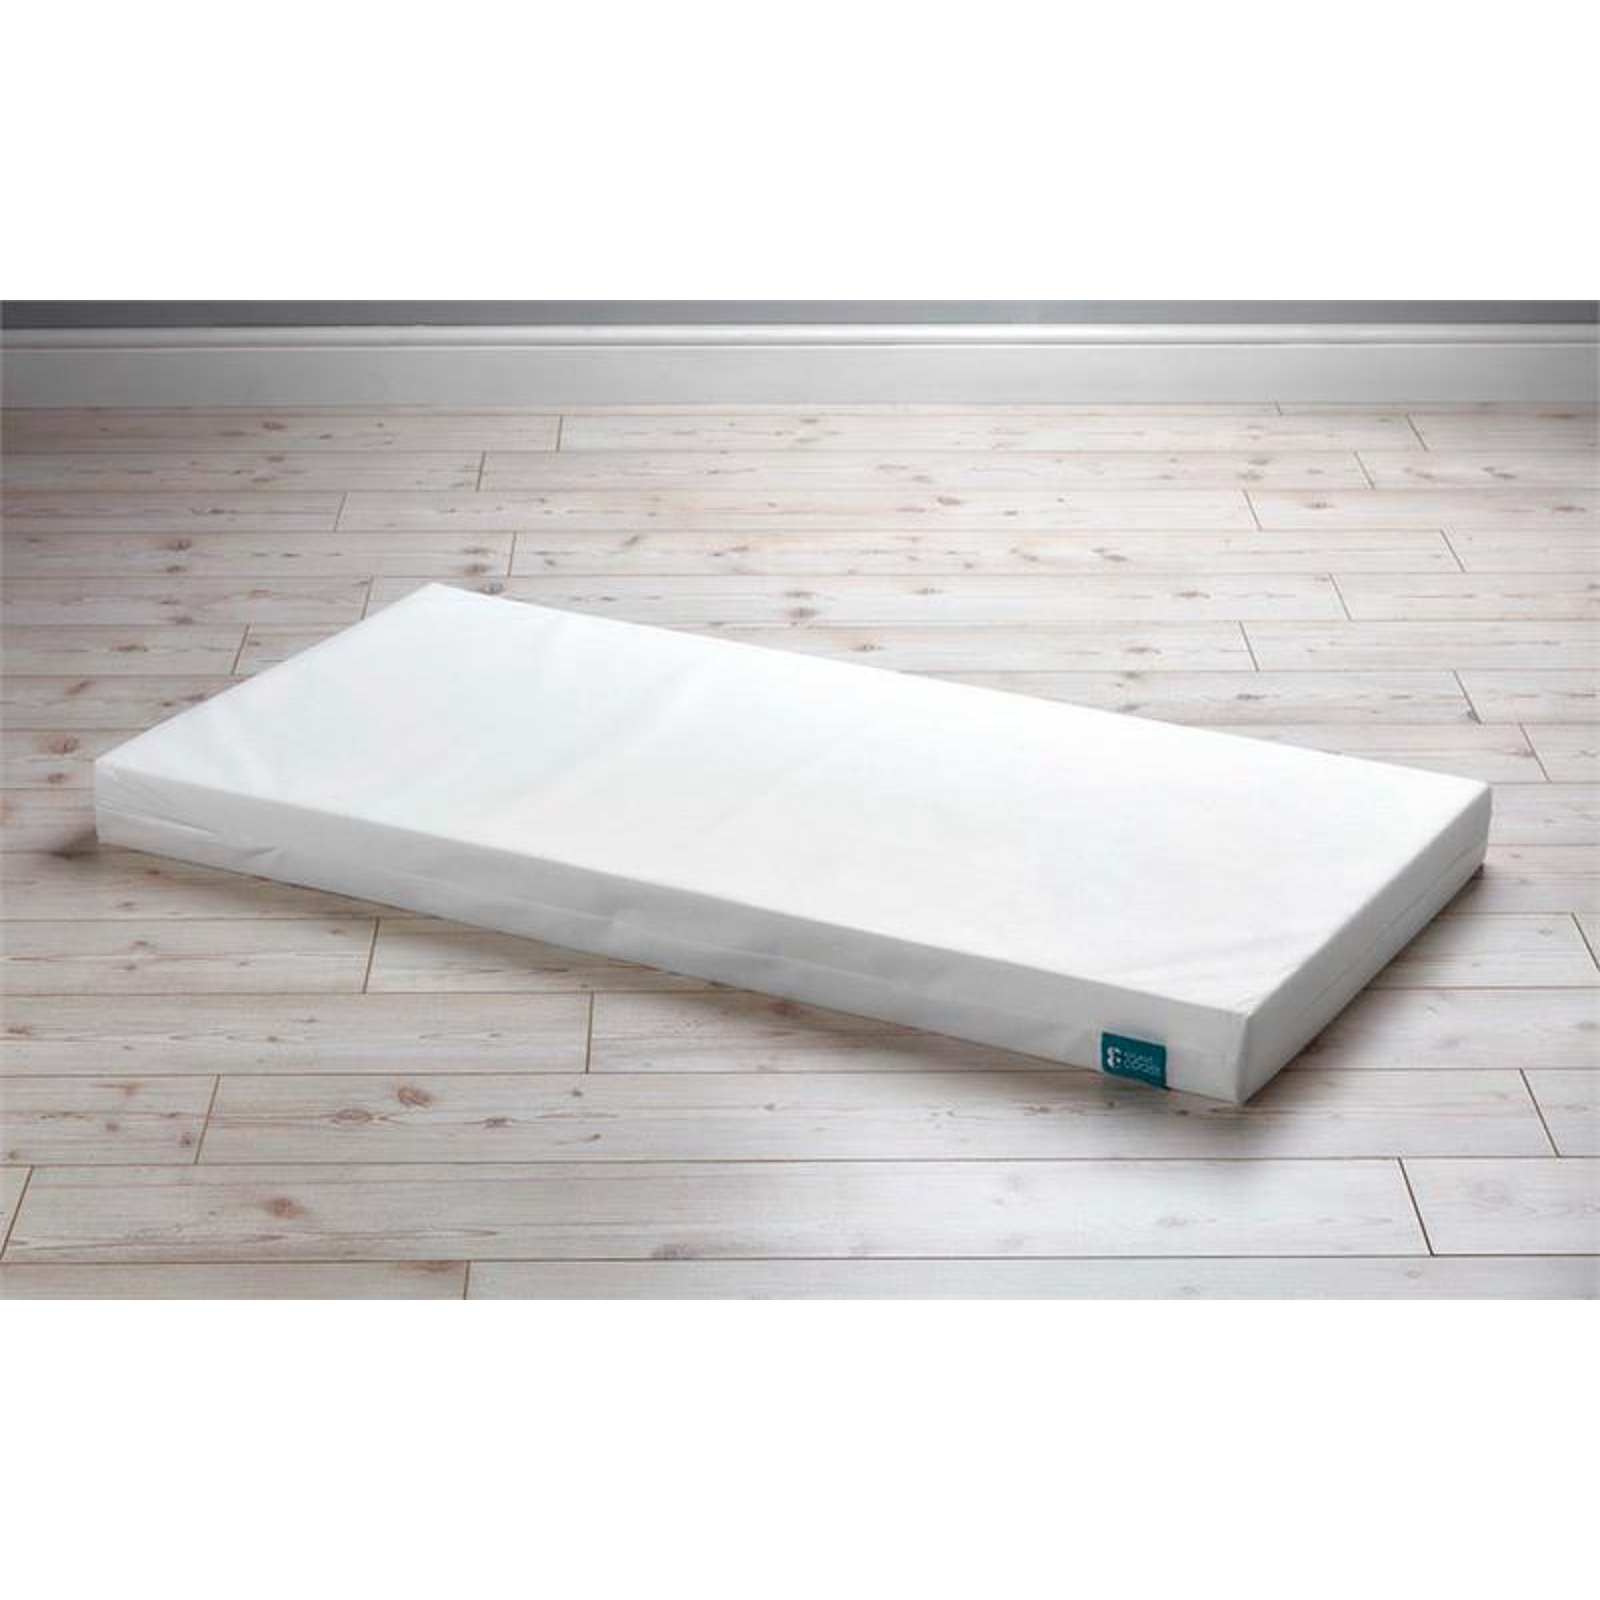 Foam Mattress with Washable Cover - 120 x 60 x 8cm